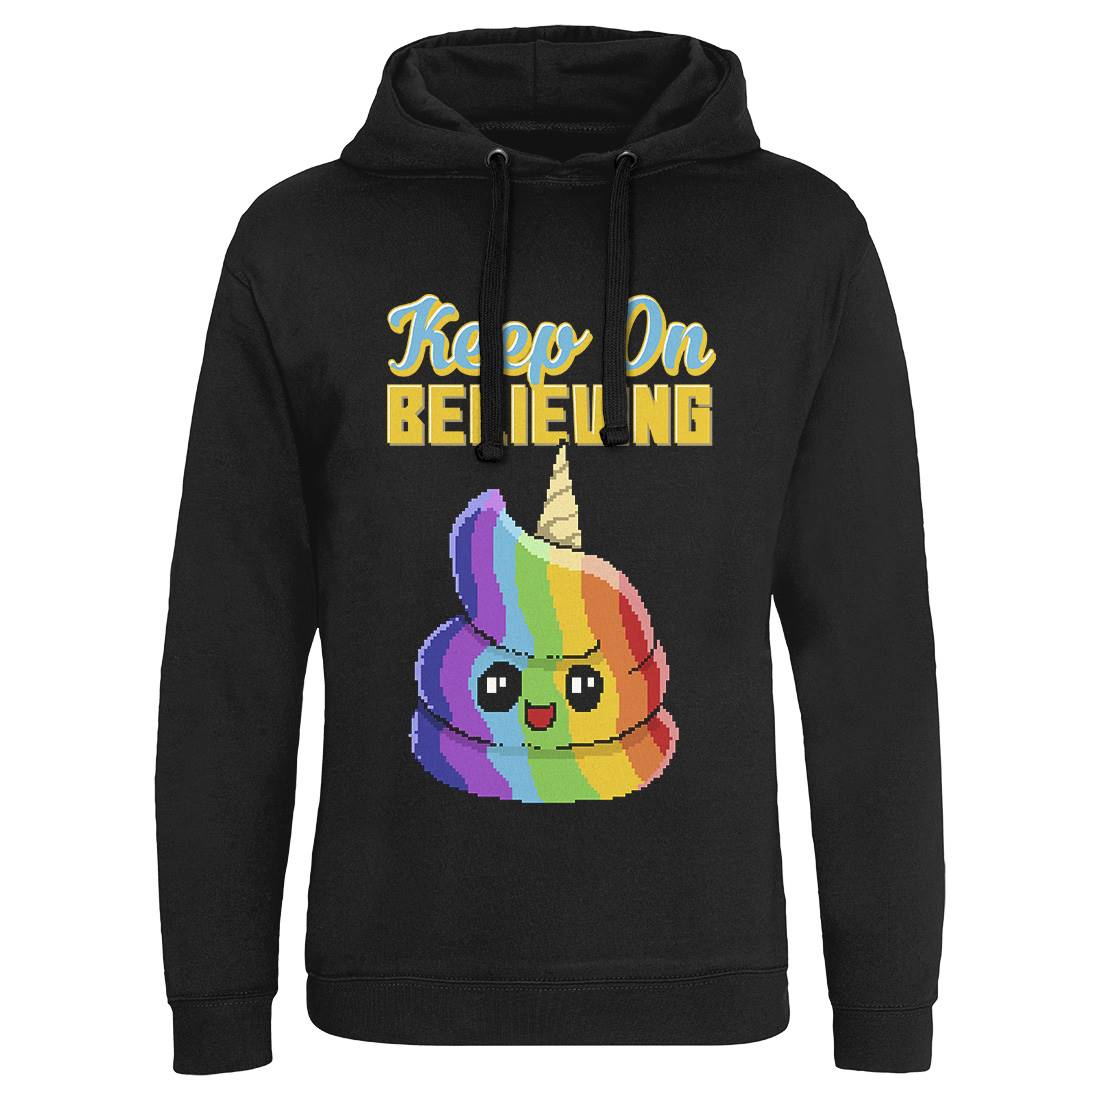 Keep On Believing Mens Hoodie Without Pocket Retro B921